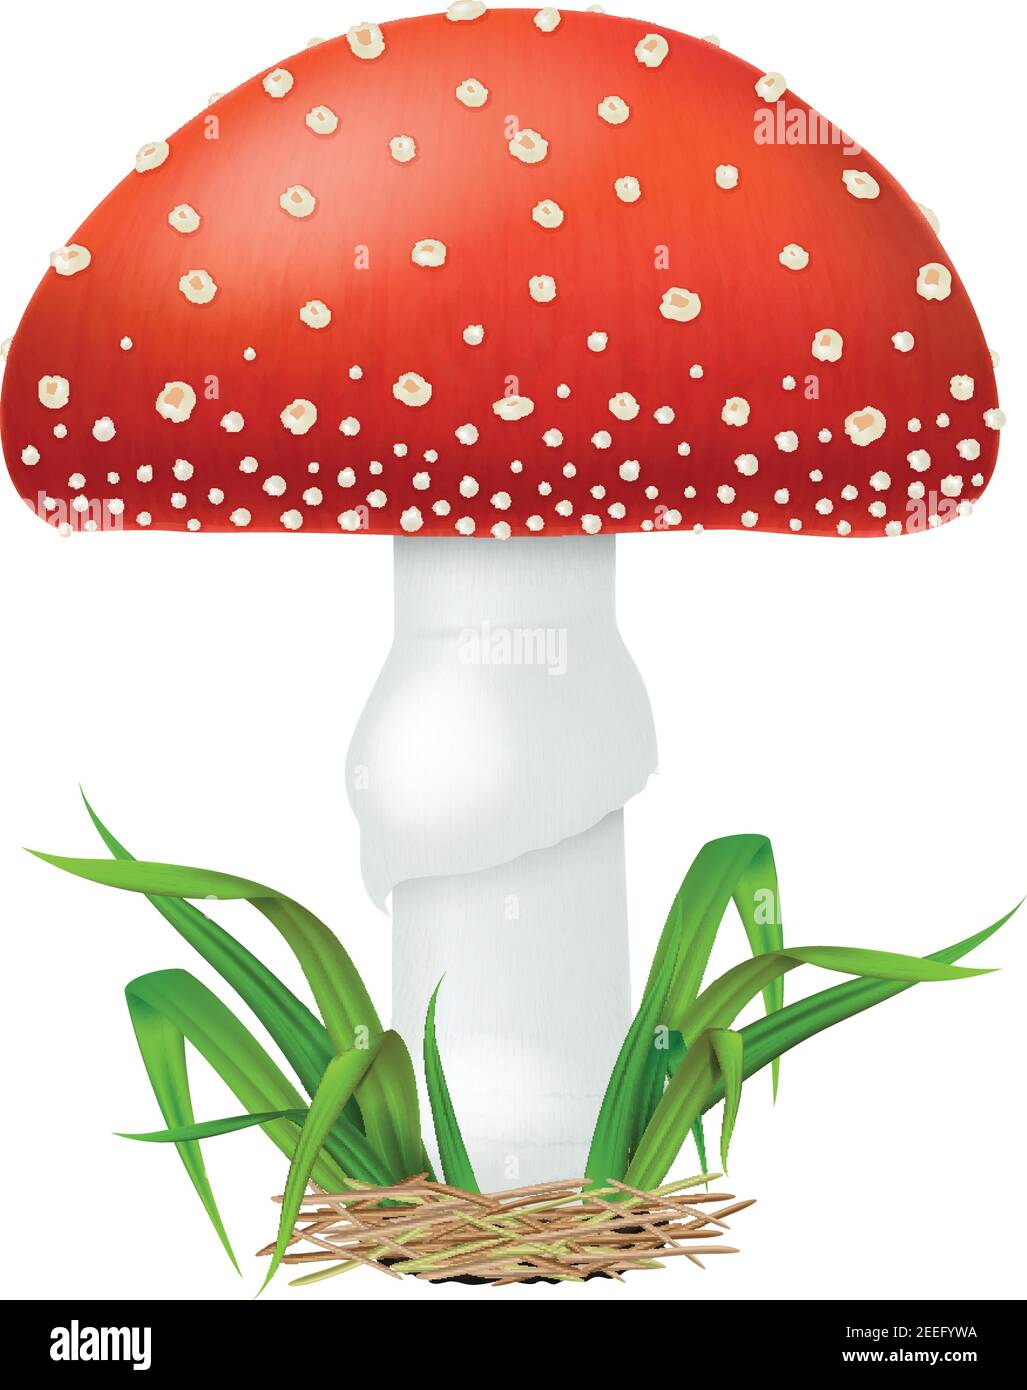 Amanita muscaria or fly agaric mushroom with green grass isolated on white background. Vector illustration. Stock Vector